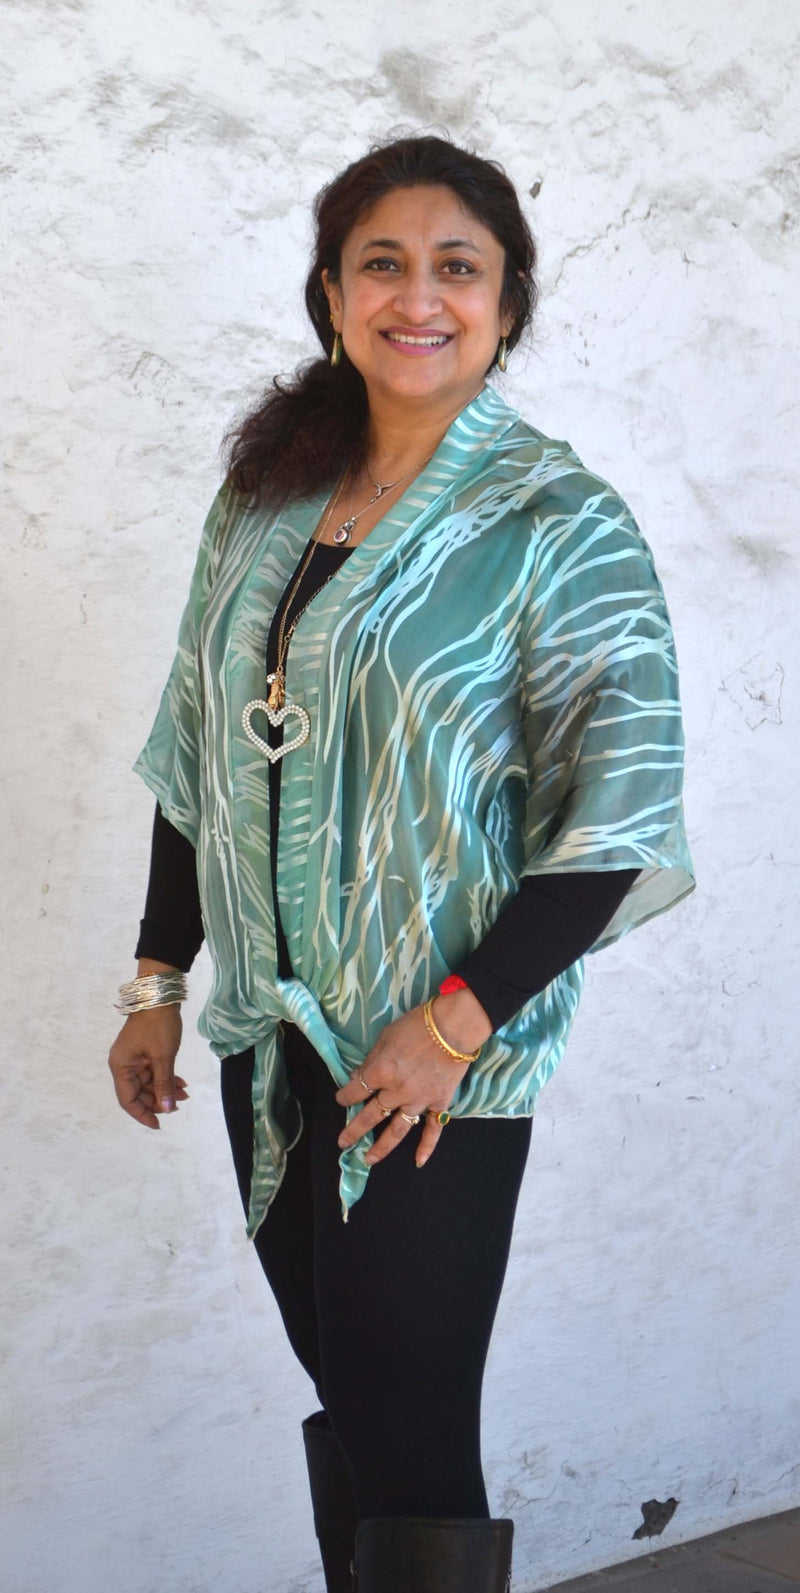 This jade green hand painted devore kimono jacket is available in sizes S-L. It can be hand washed or dry cleaned. These jackets have a scarf like edge and can be tied at the waist. You can wear it with solid sweaters, camisoles. dresses. A matching Poshaq silk camisole can be made separately once ordered.